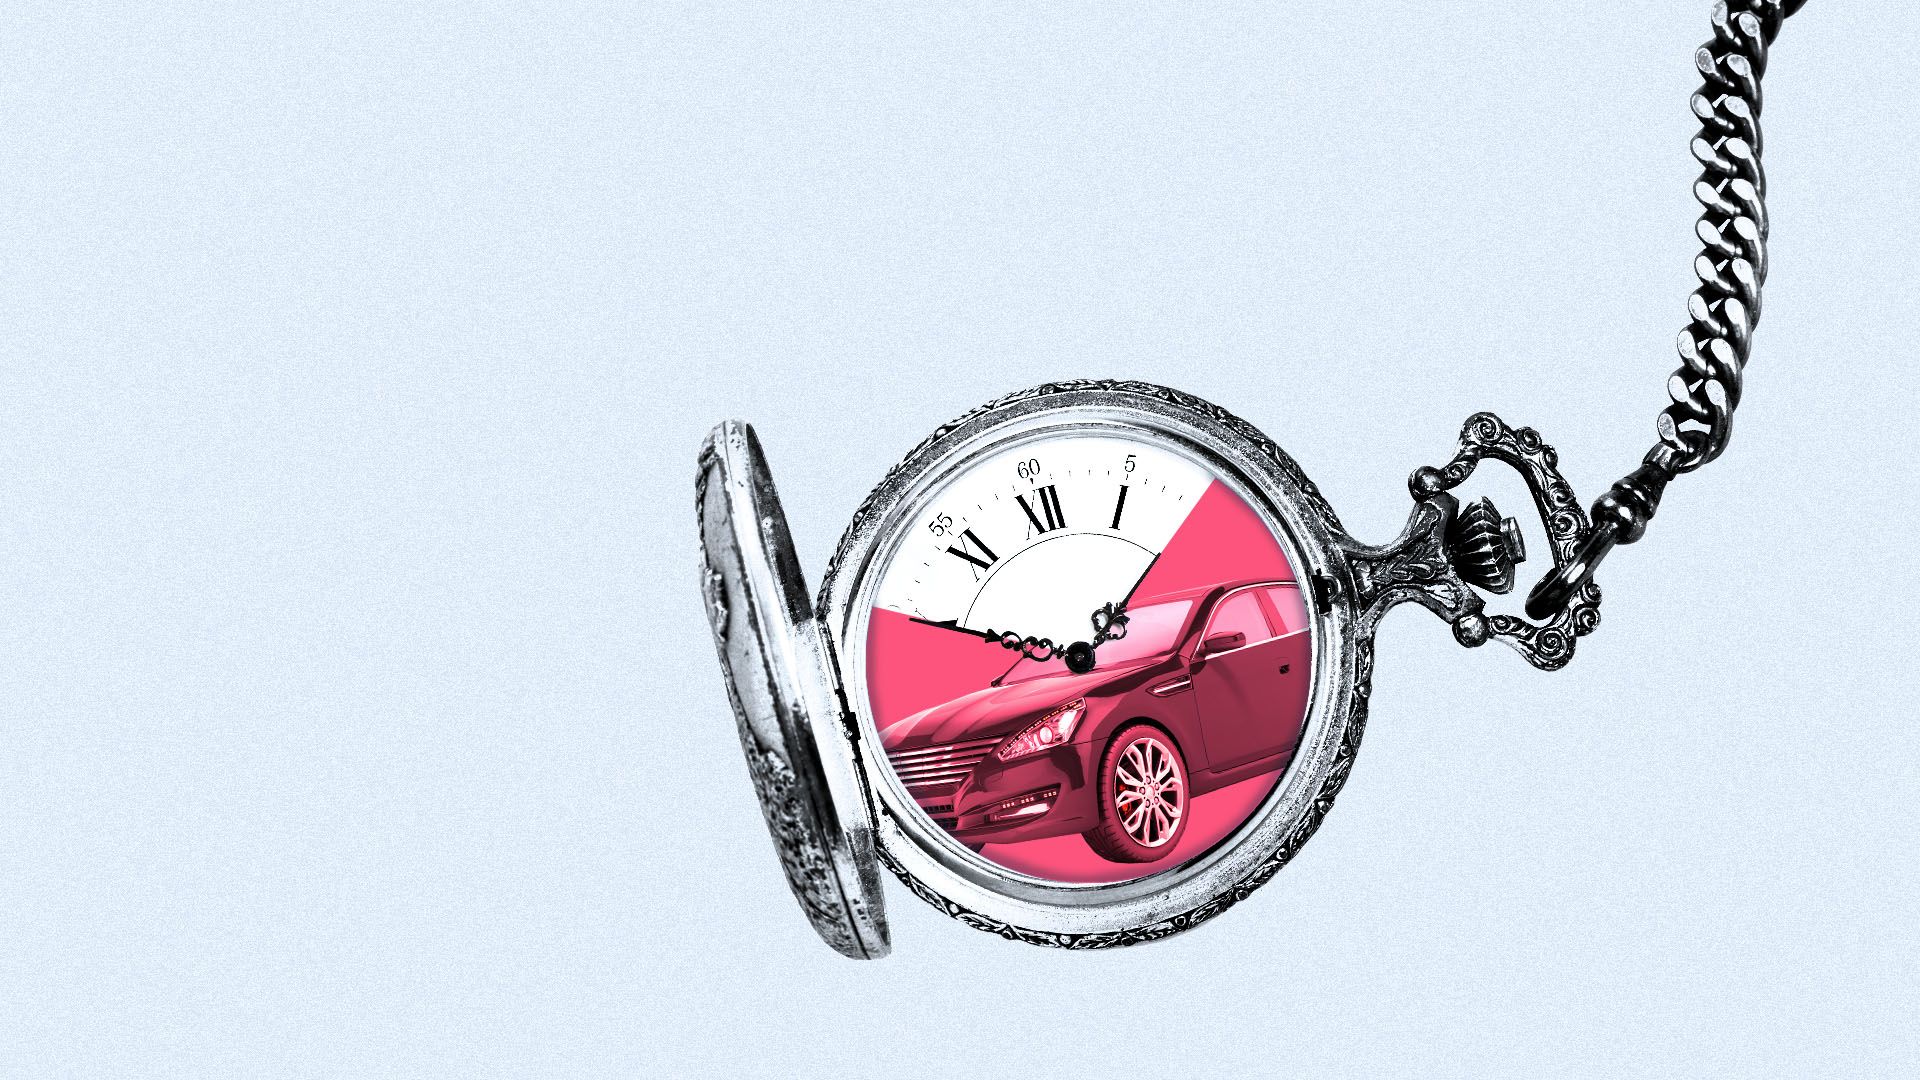 Illustration of a pocket watch with a car reflected in its face